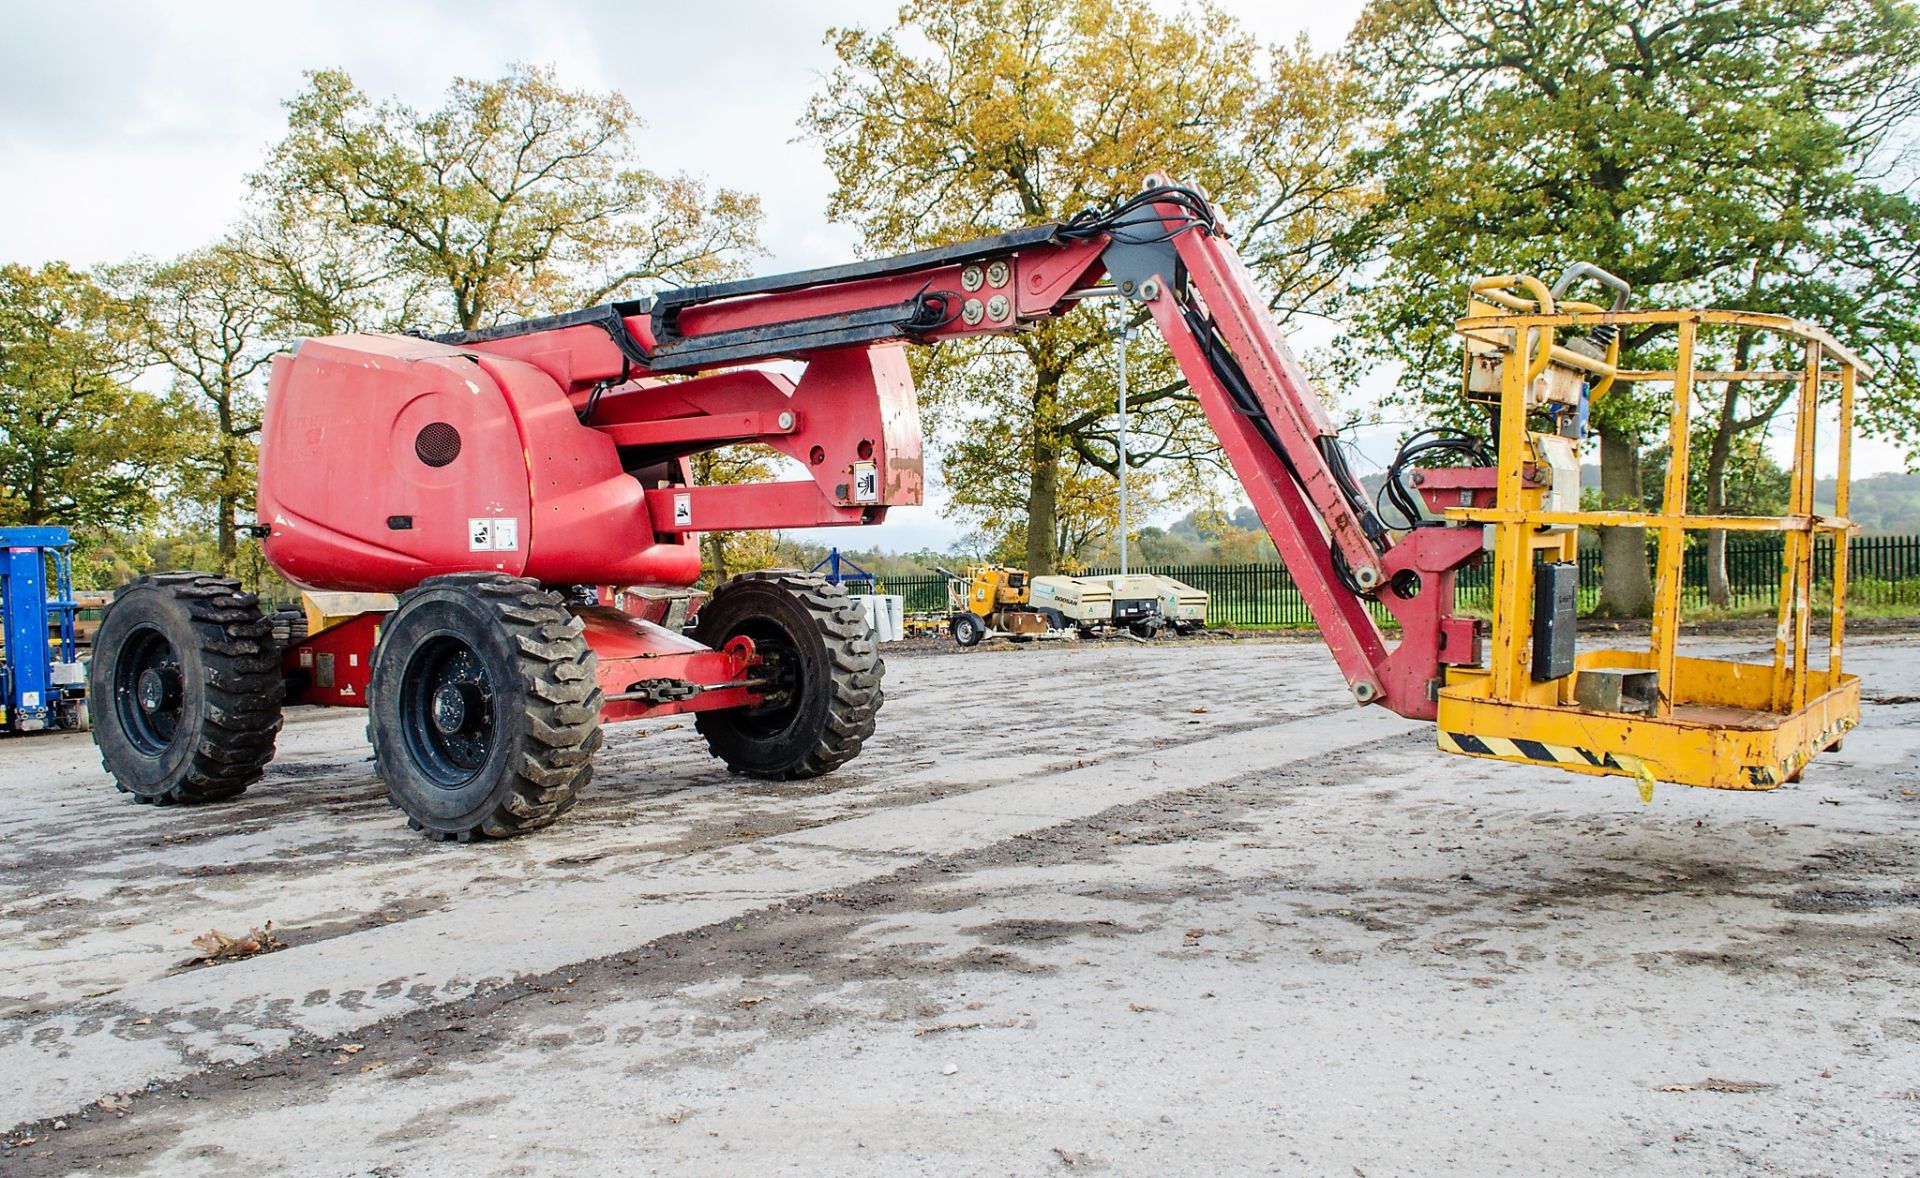 Haulotte HA16PX diesel driven 4WD rough terrain articulated boom access platform Year: 2007 S/N: - Image 2 of 17